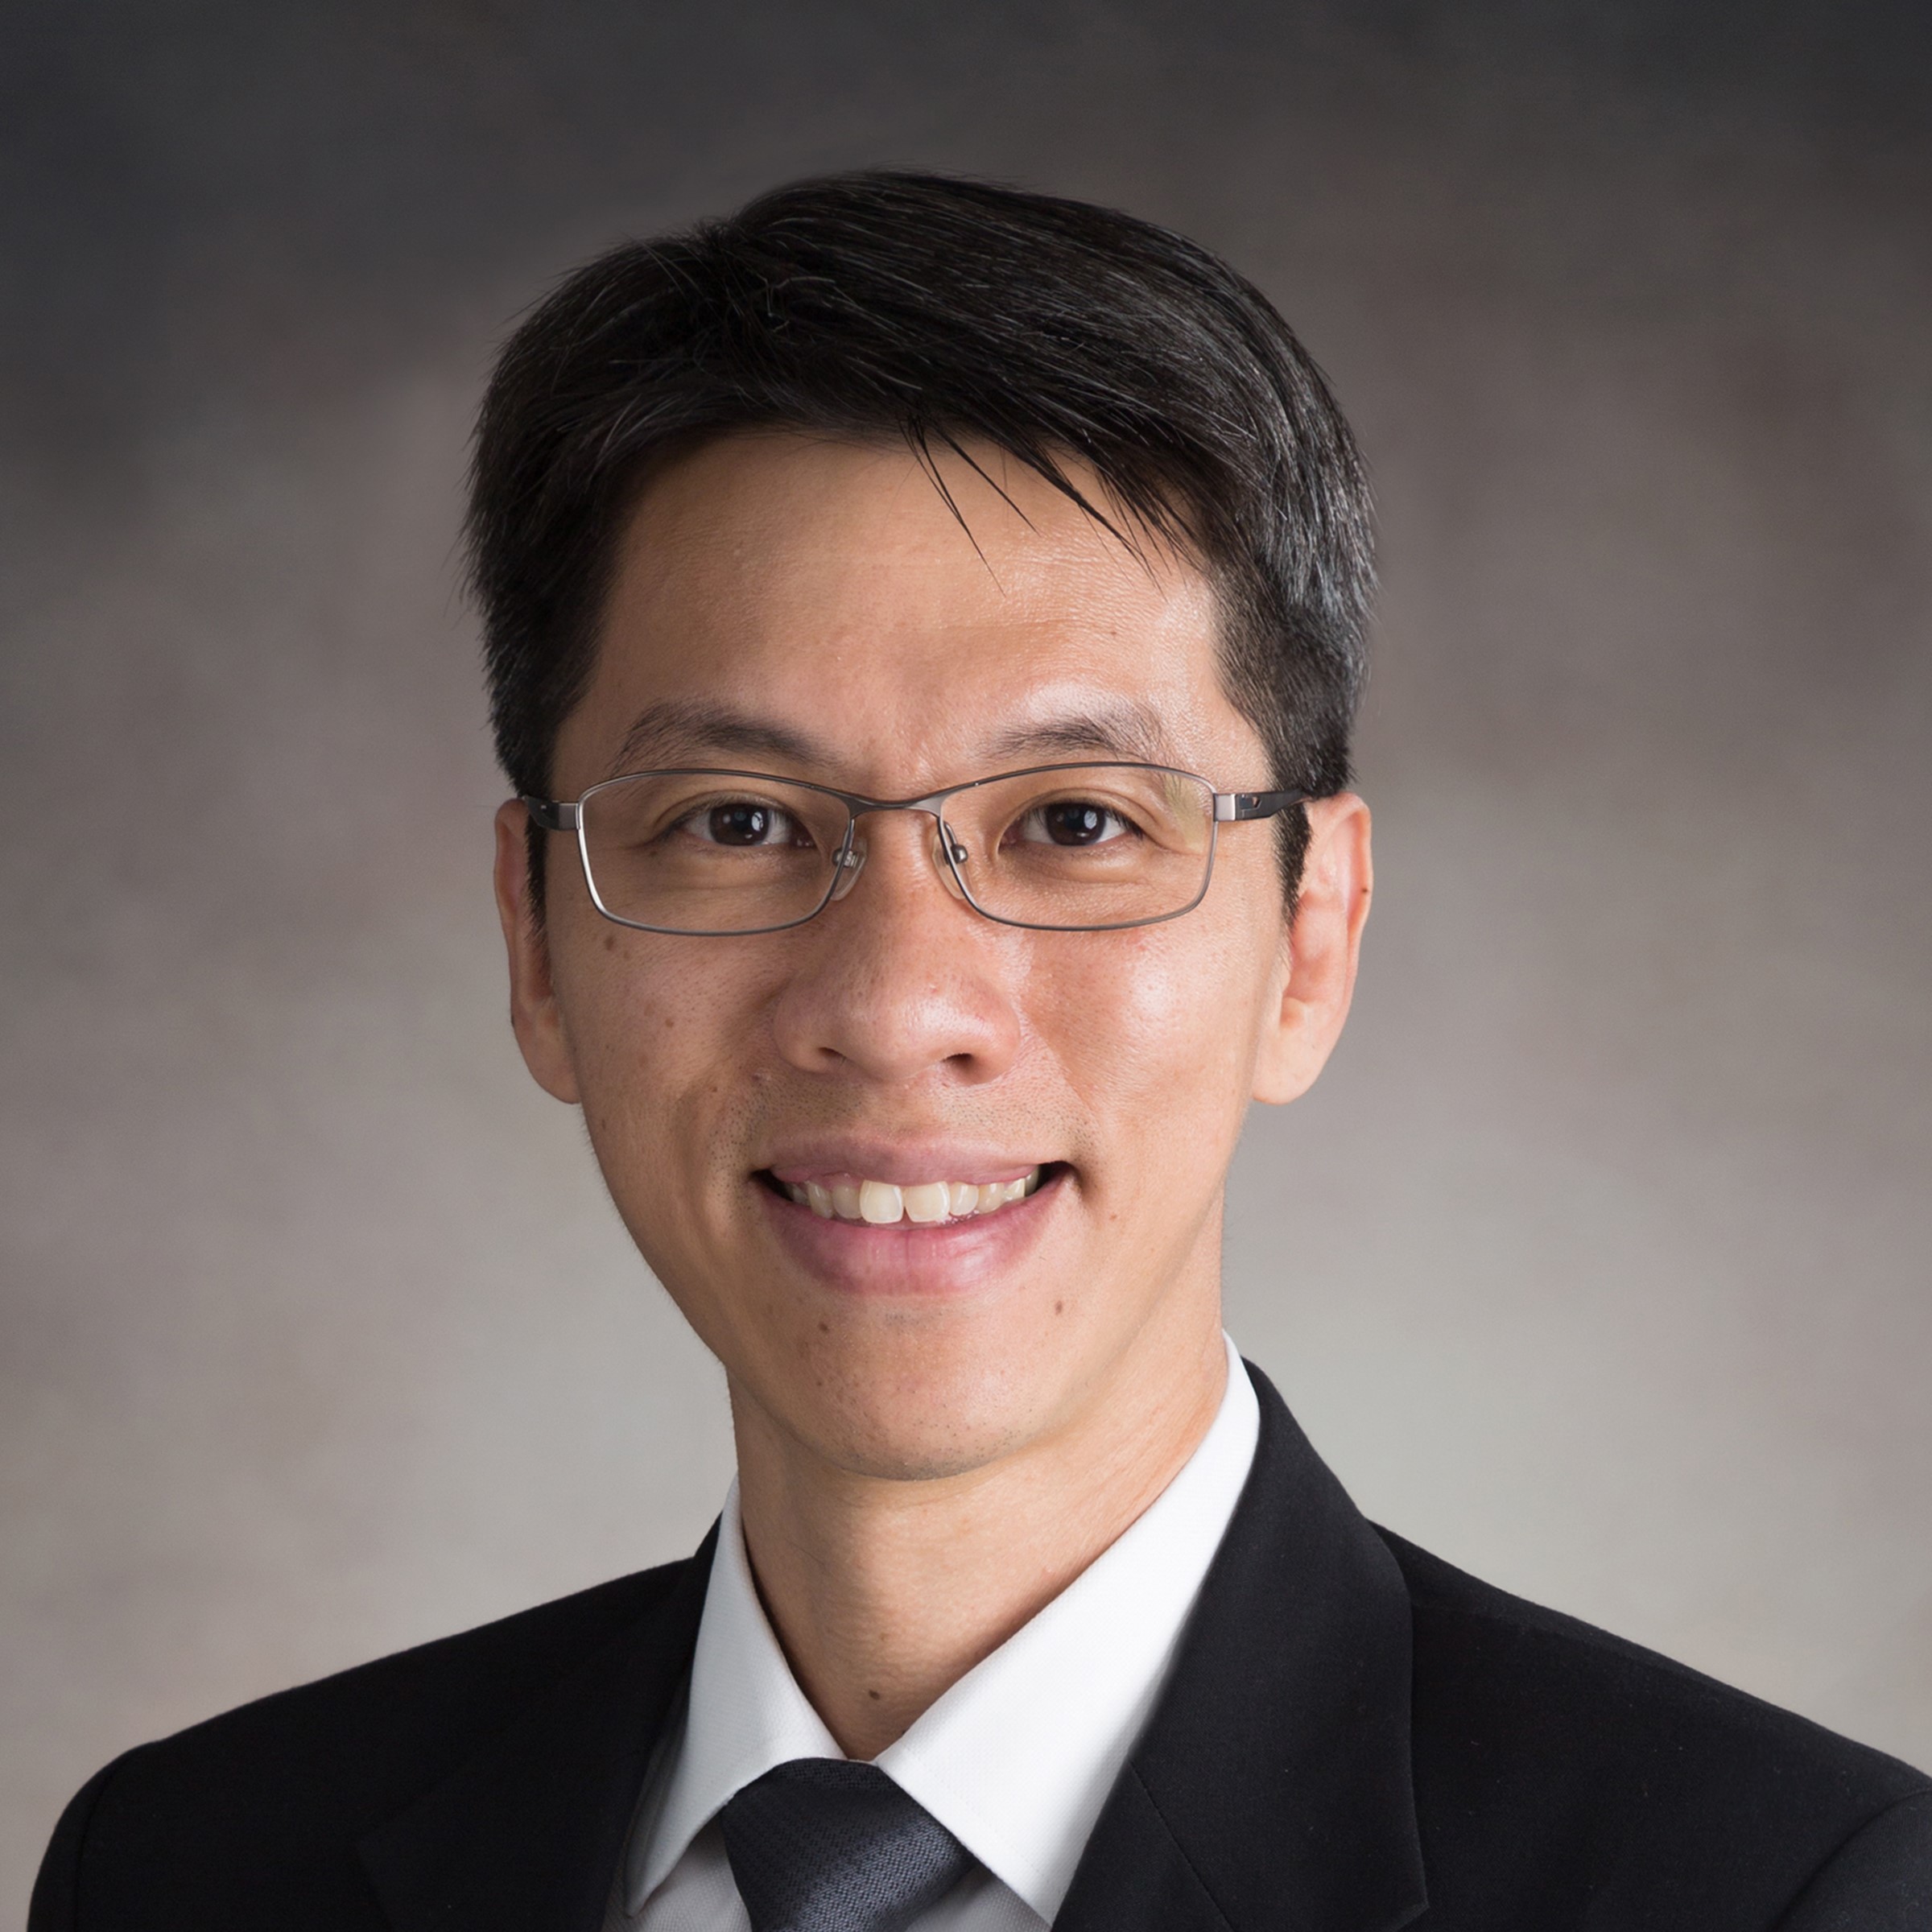 Derek Ho, Assistant General Counsel, Privacy and Data Protection, Mastercard